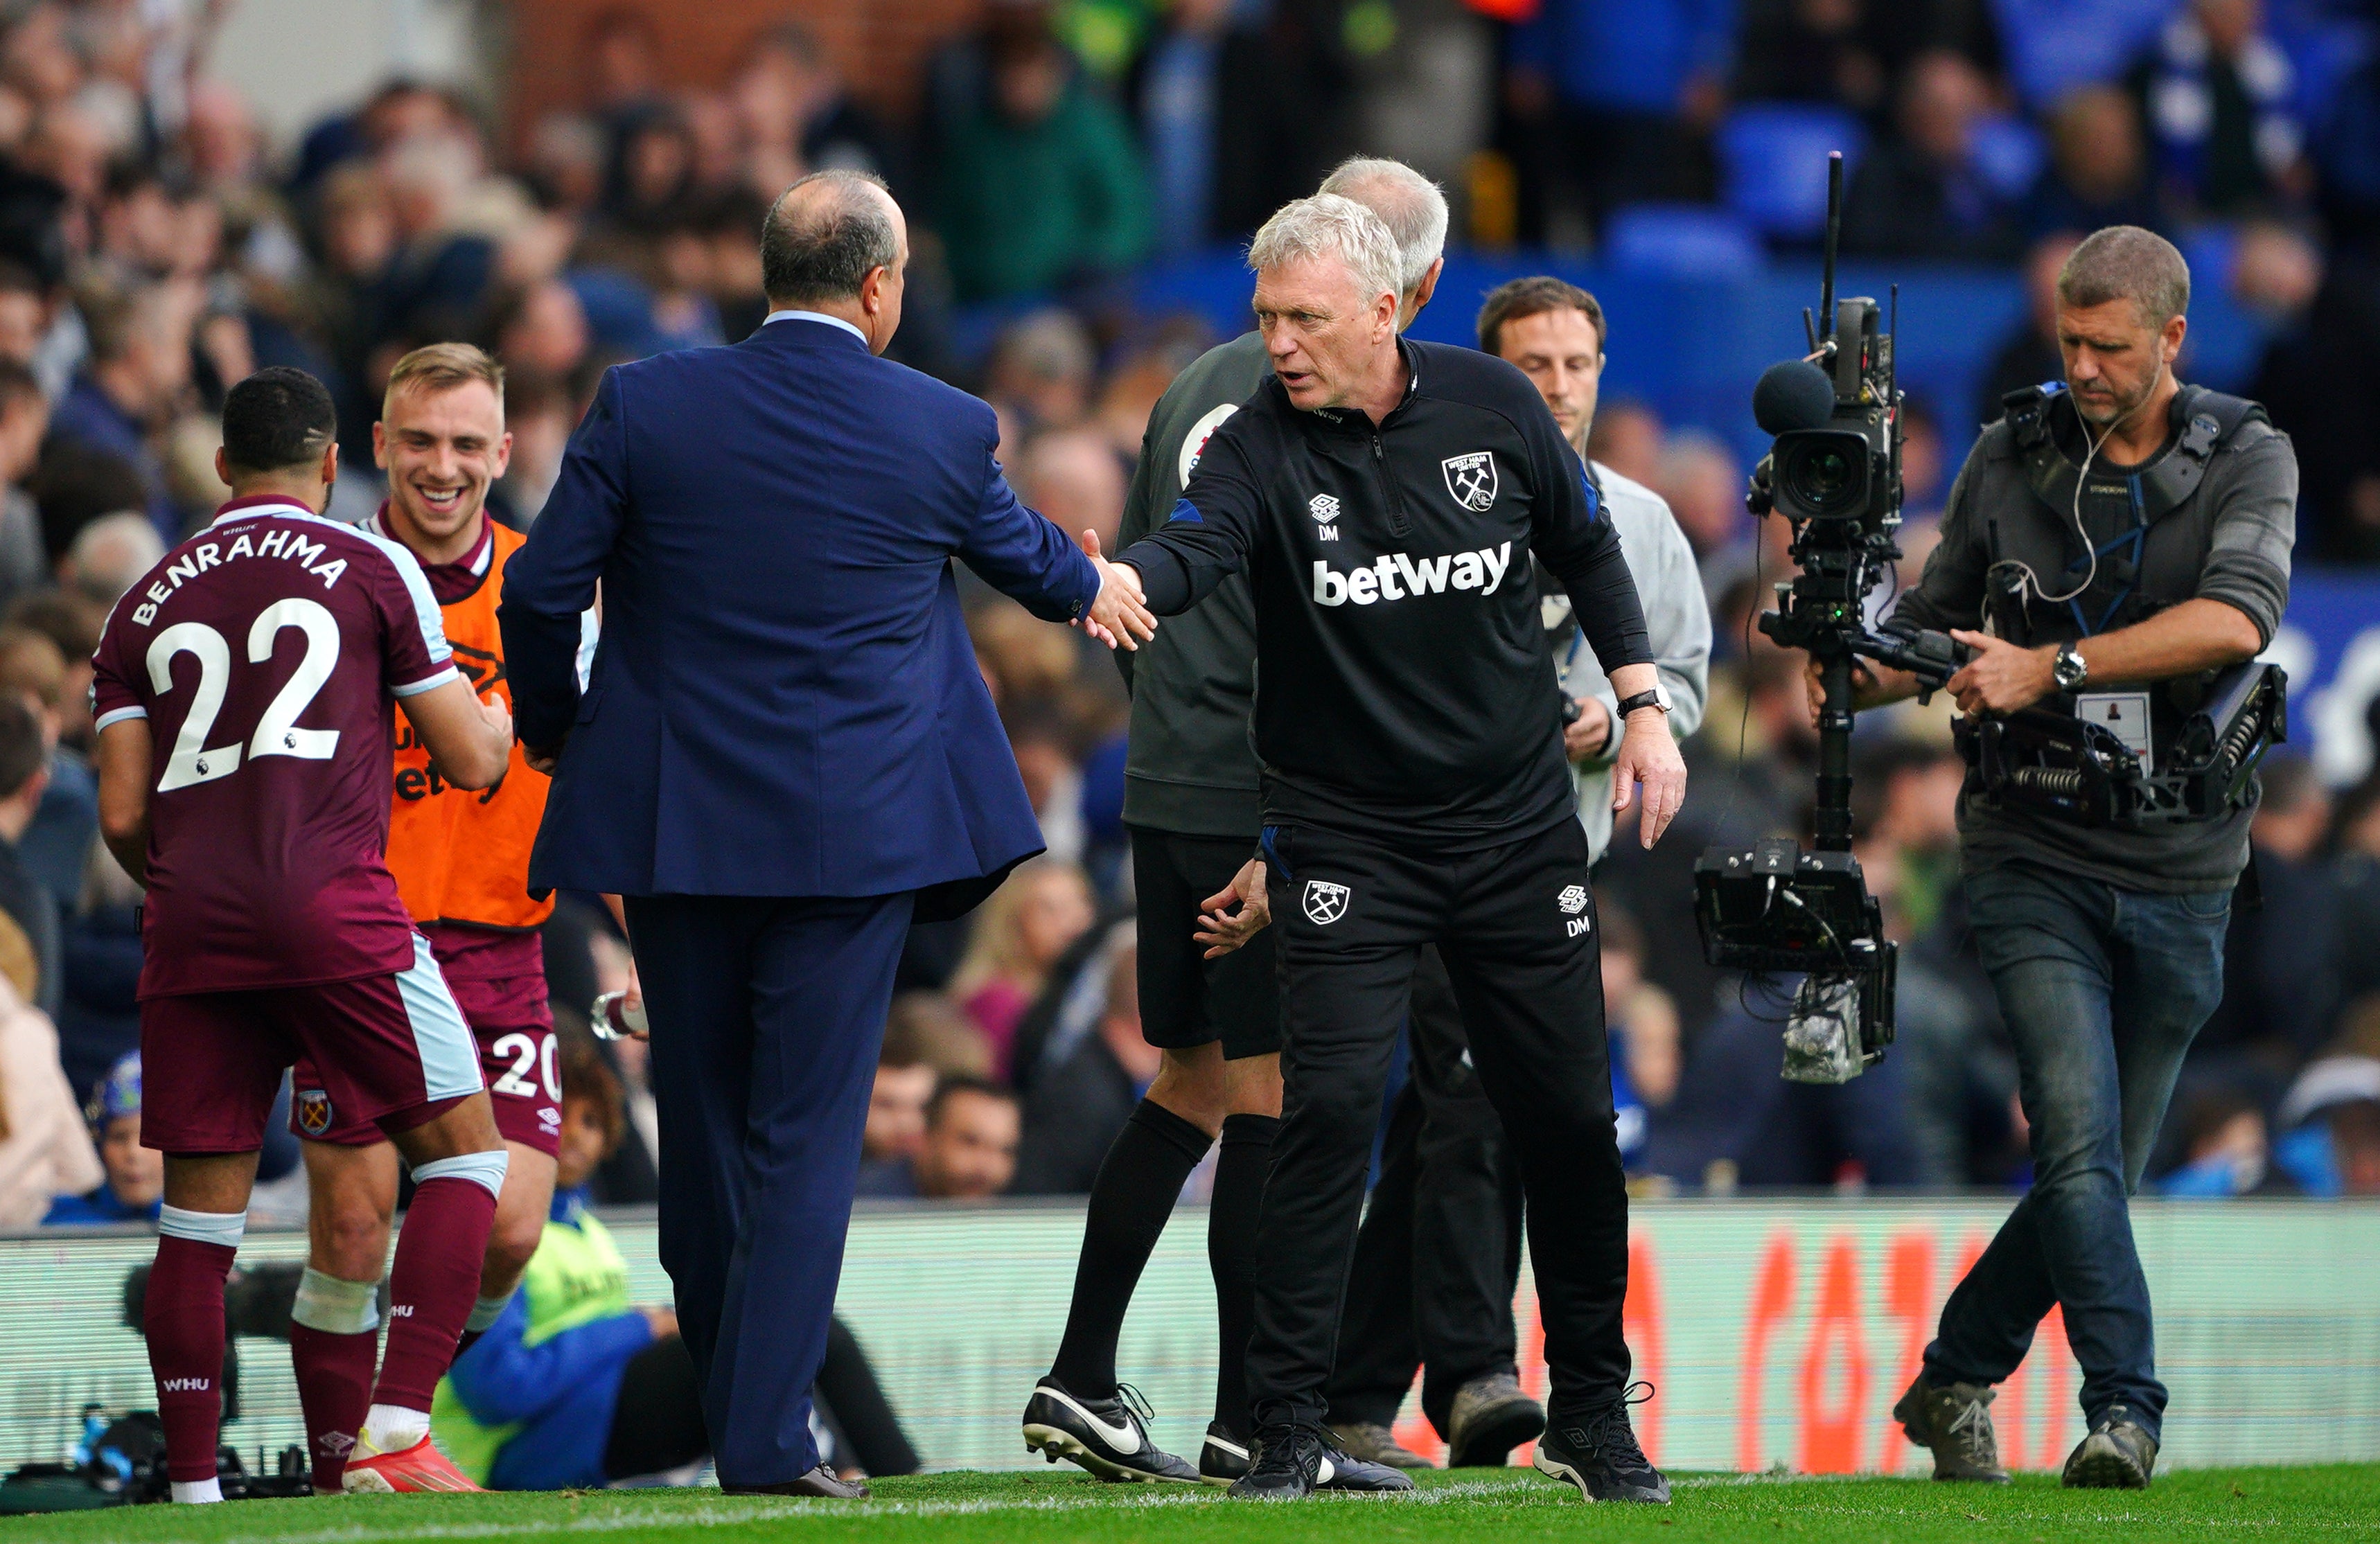 West Ham boss David Moyes (right) and Everton manager Rafael Benitez shake hands after the match (Peter Byrne/PA)